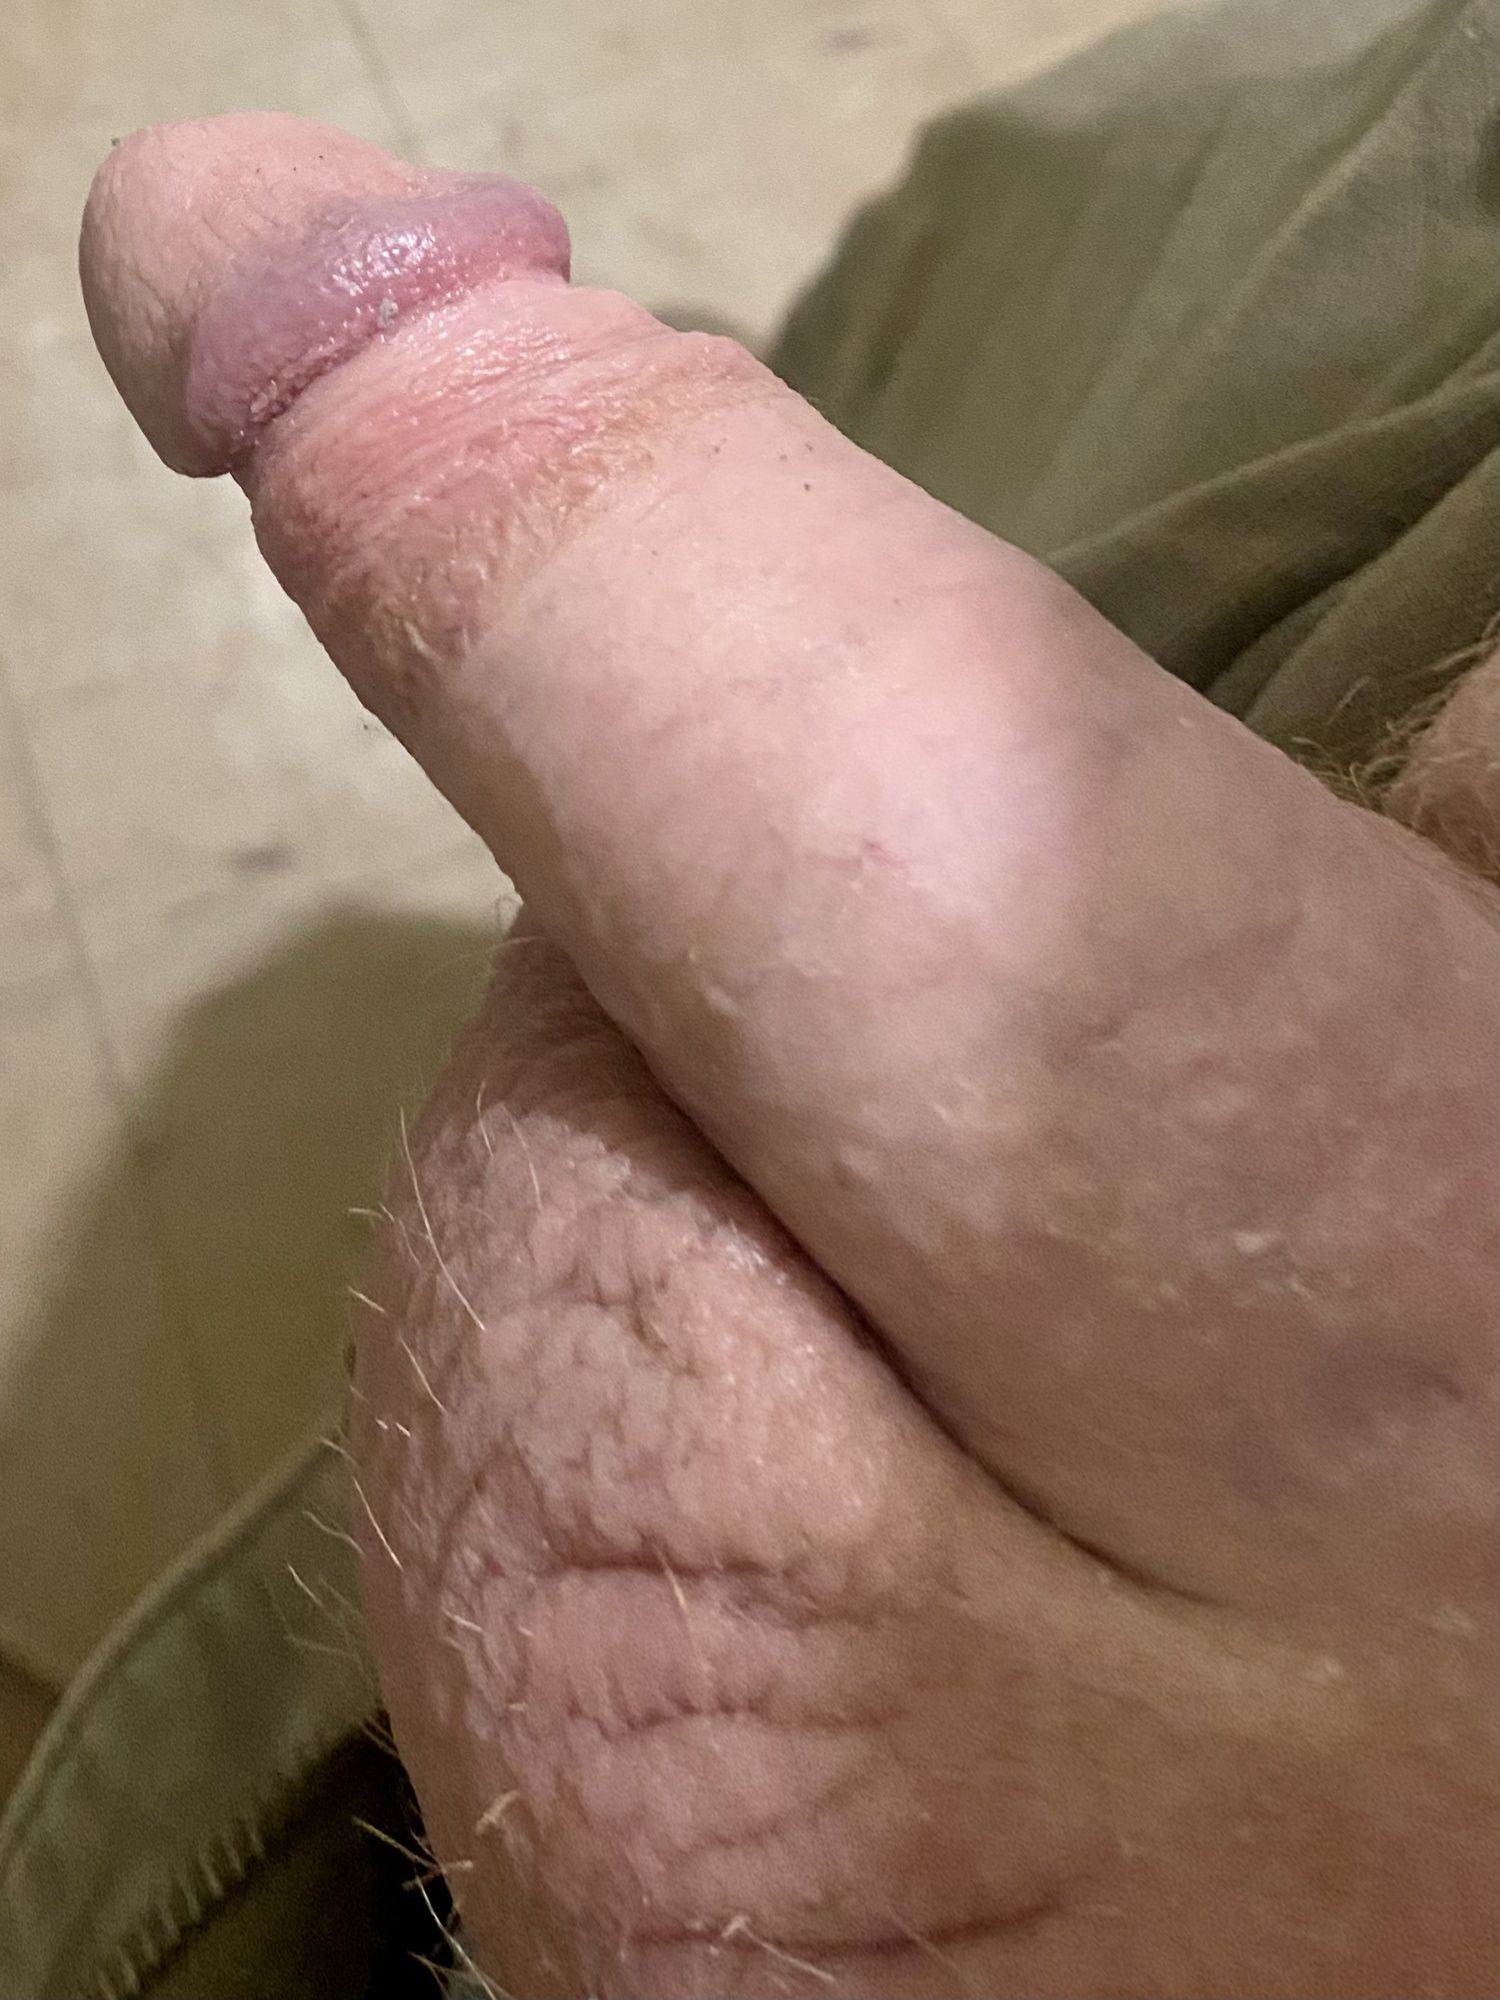 Perfect sized cock #2